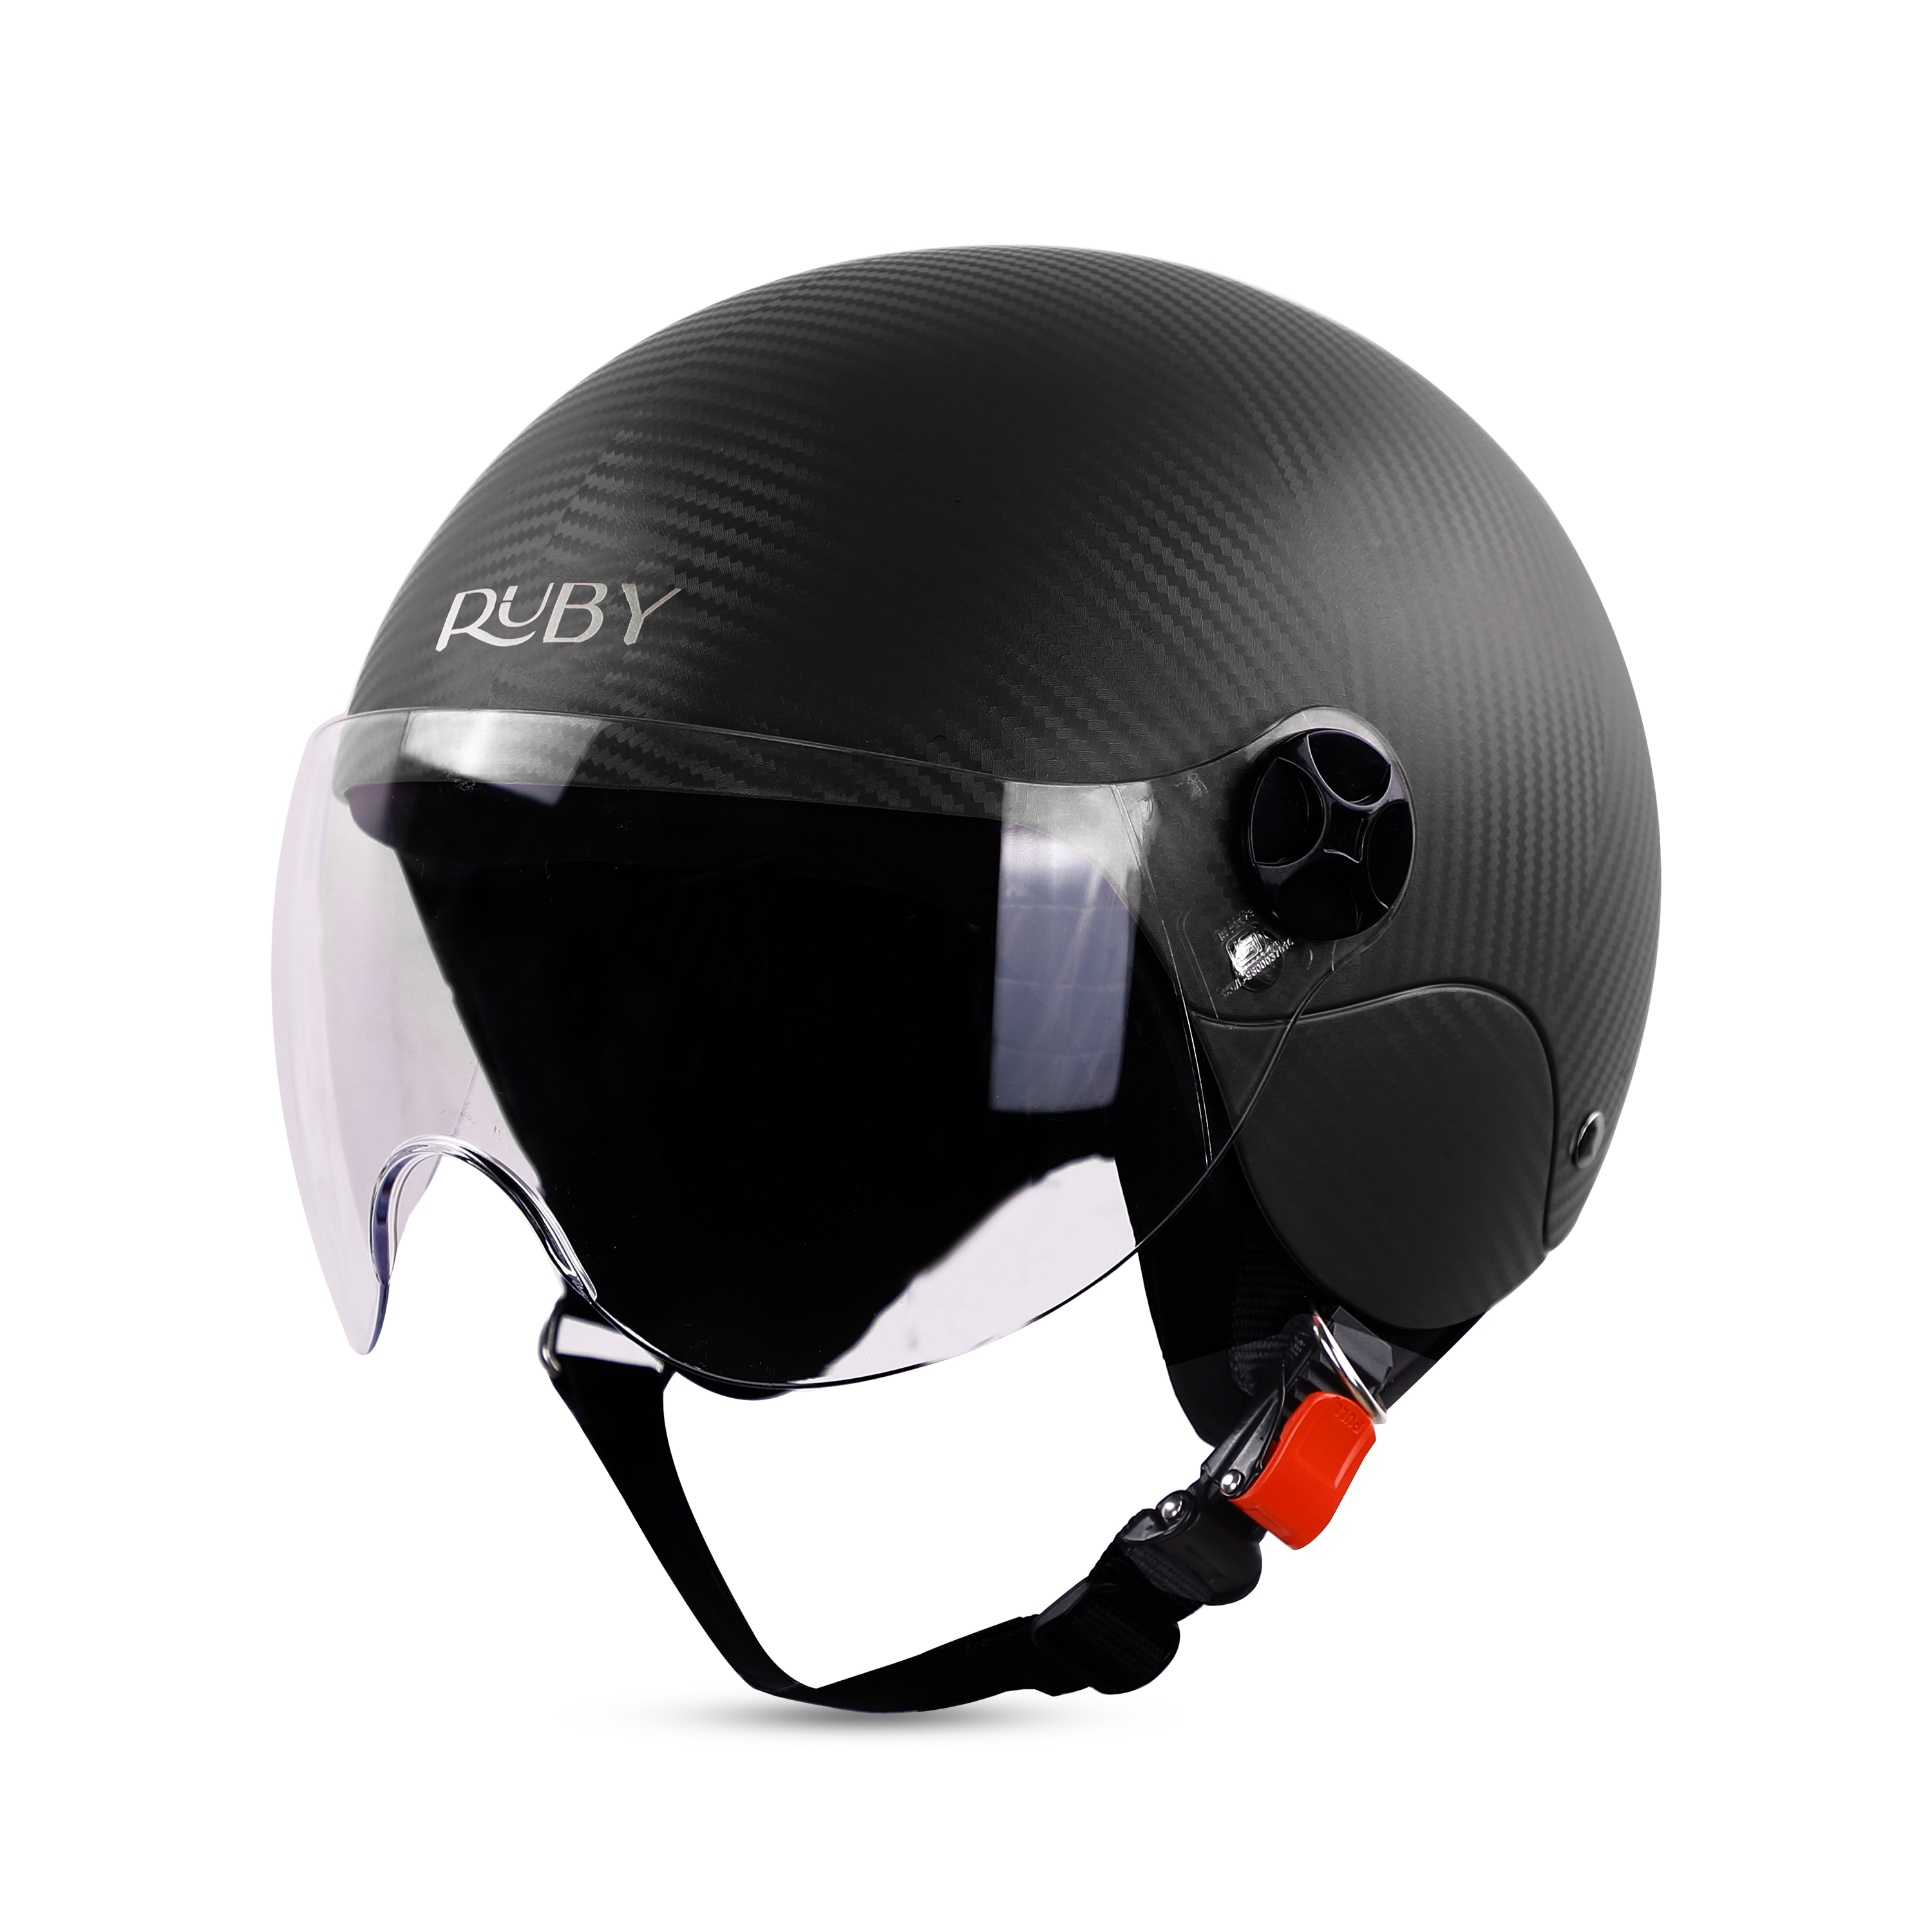 Steelbird SBH-16 Ruby ISI Certified Open Face Helmet (Dashing Black With Clear Visor)